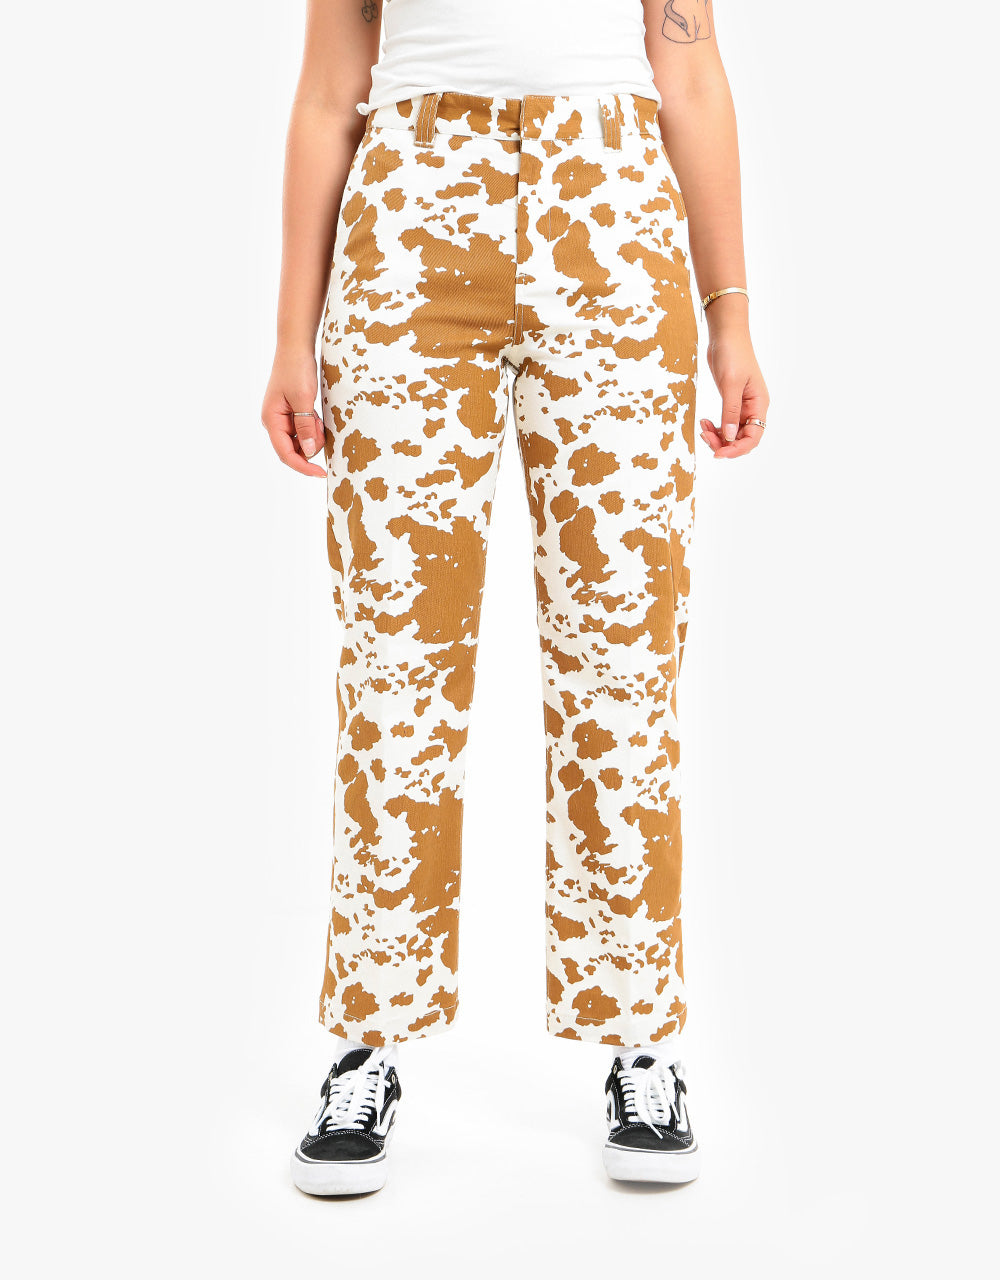 Obey Womens Straggler Printed Pant - Cow Print